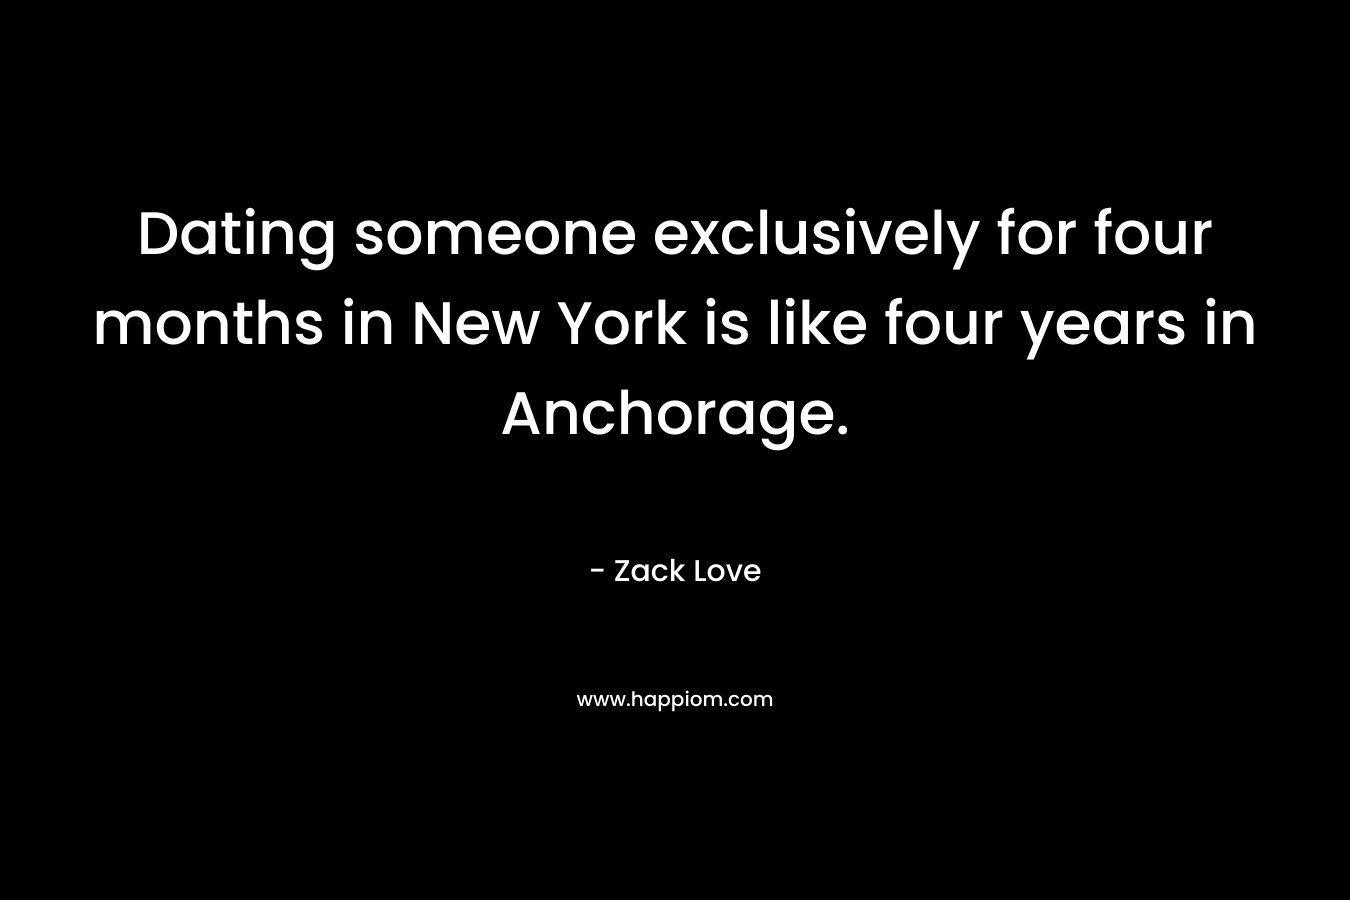 Dating someone exclusively for four months in New York is like four years in Anchorage. – Zack Love